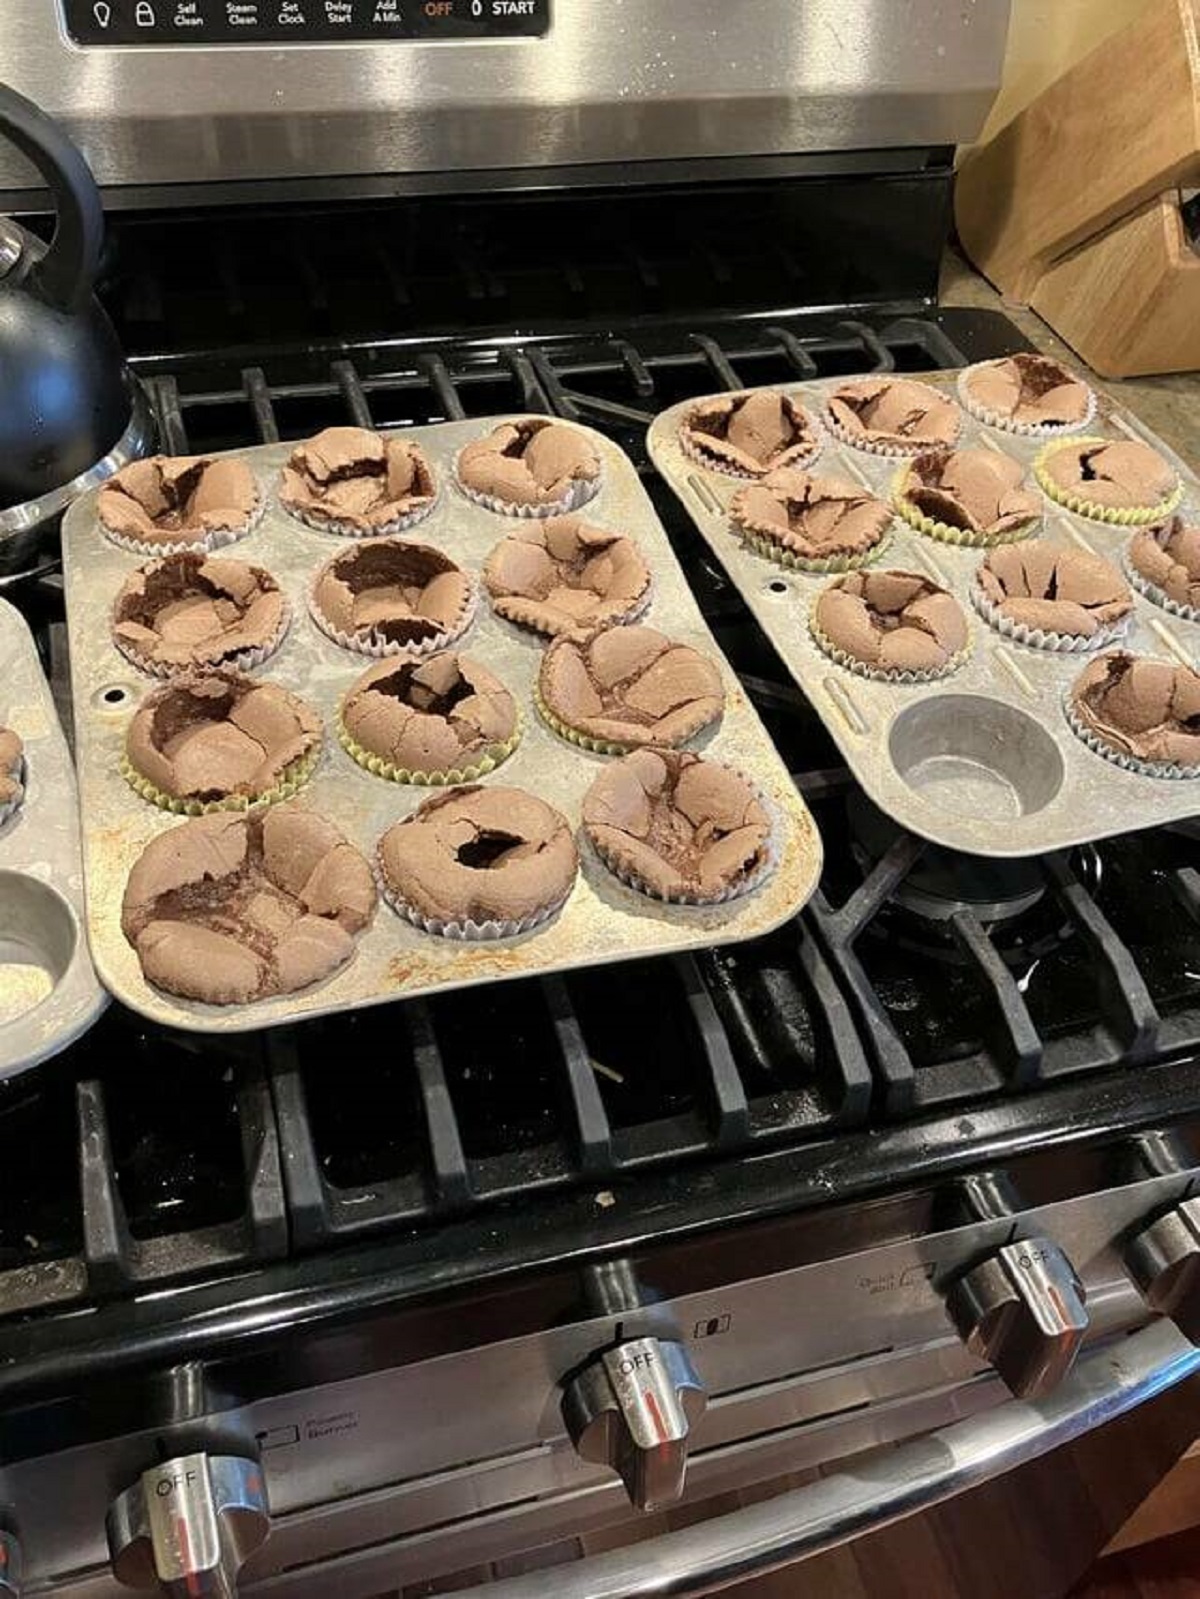 "Tried to make some flourless chocolate cupcakes for my DnD group’s gluten intolerant friend. This was the result"